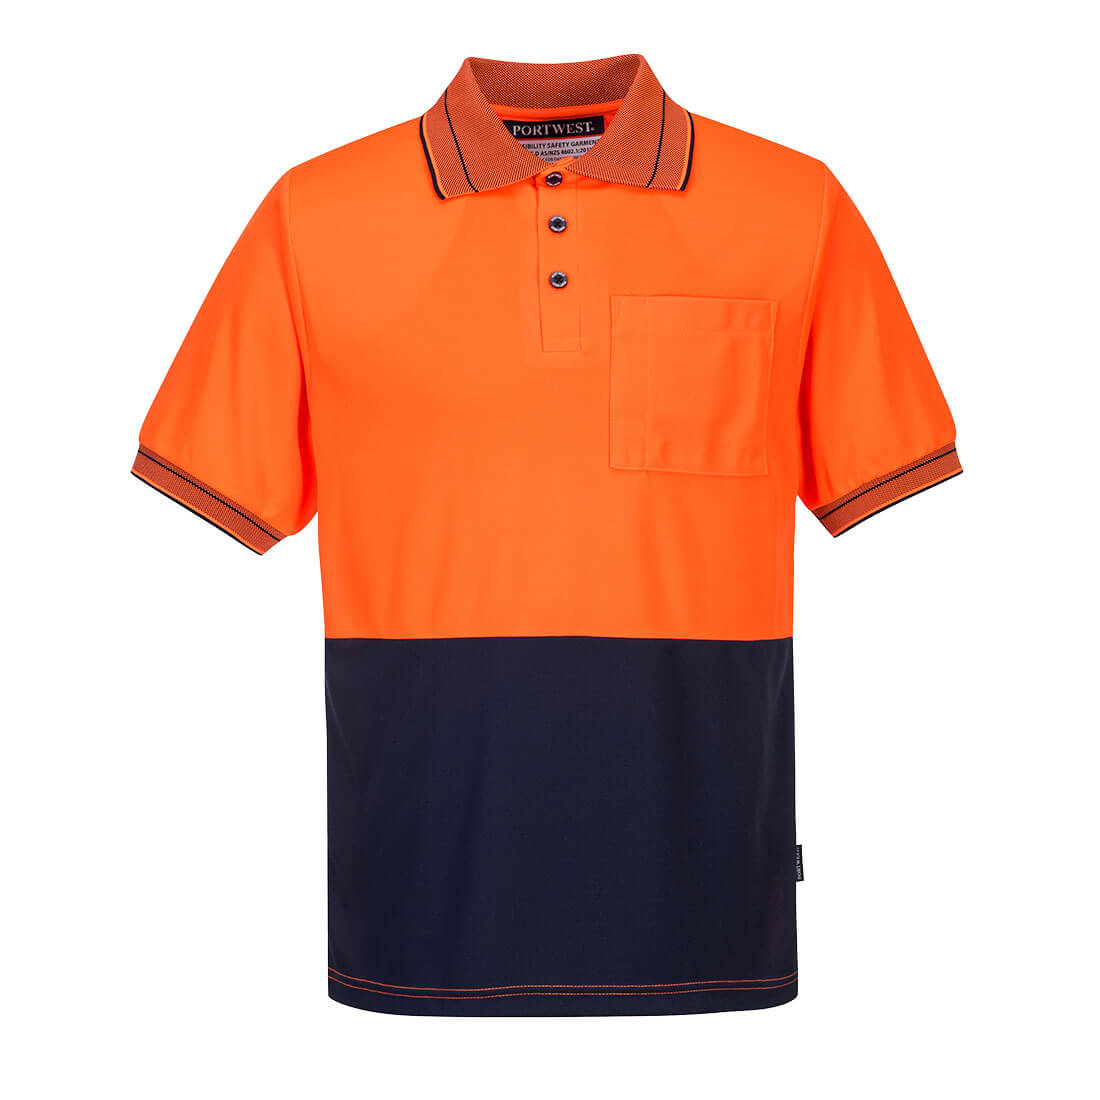 Front view of Portwest Hi Vis Short Sleeve Polo Shirt in Orange top half and Navy bottom half.